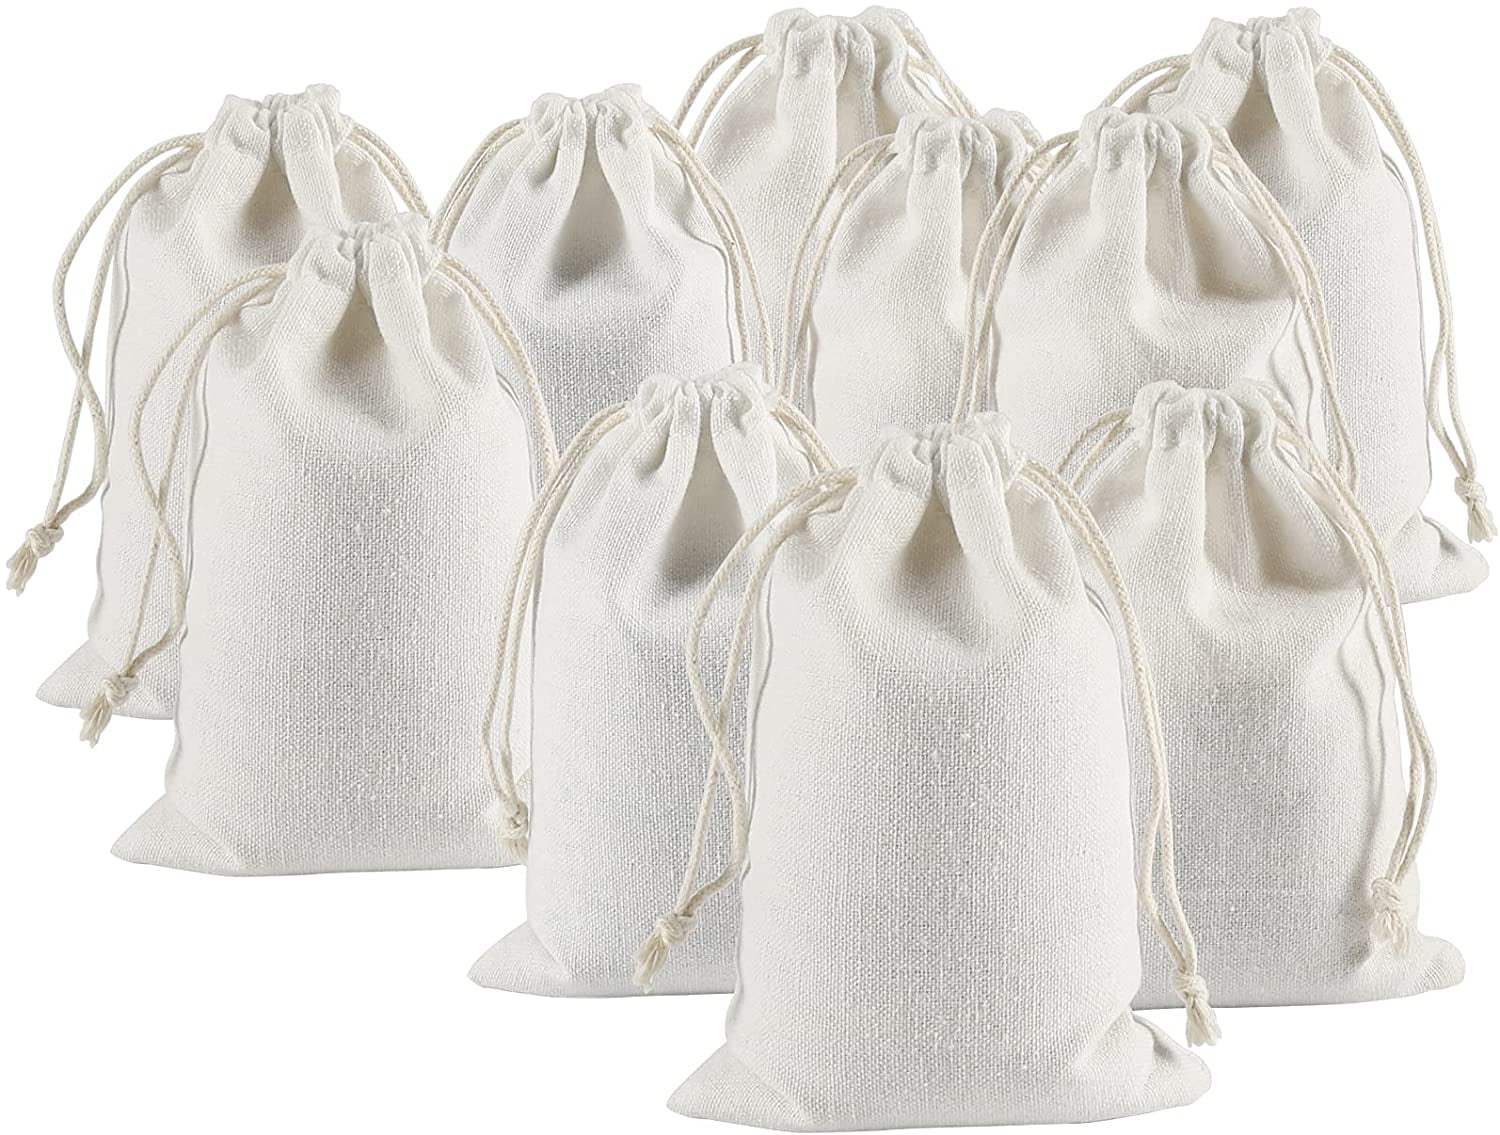 Custom Boutique Name Favor String Bag-Party Drawstring Muslin Bags-Set of  30 Bags – BOSTON CREATIVE COMPANY